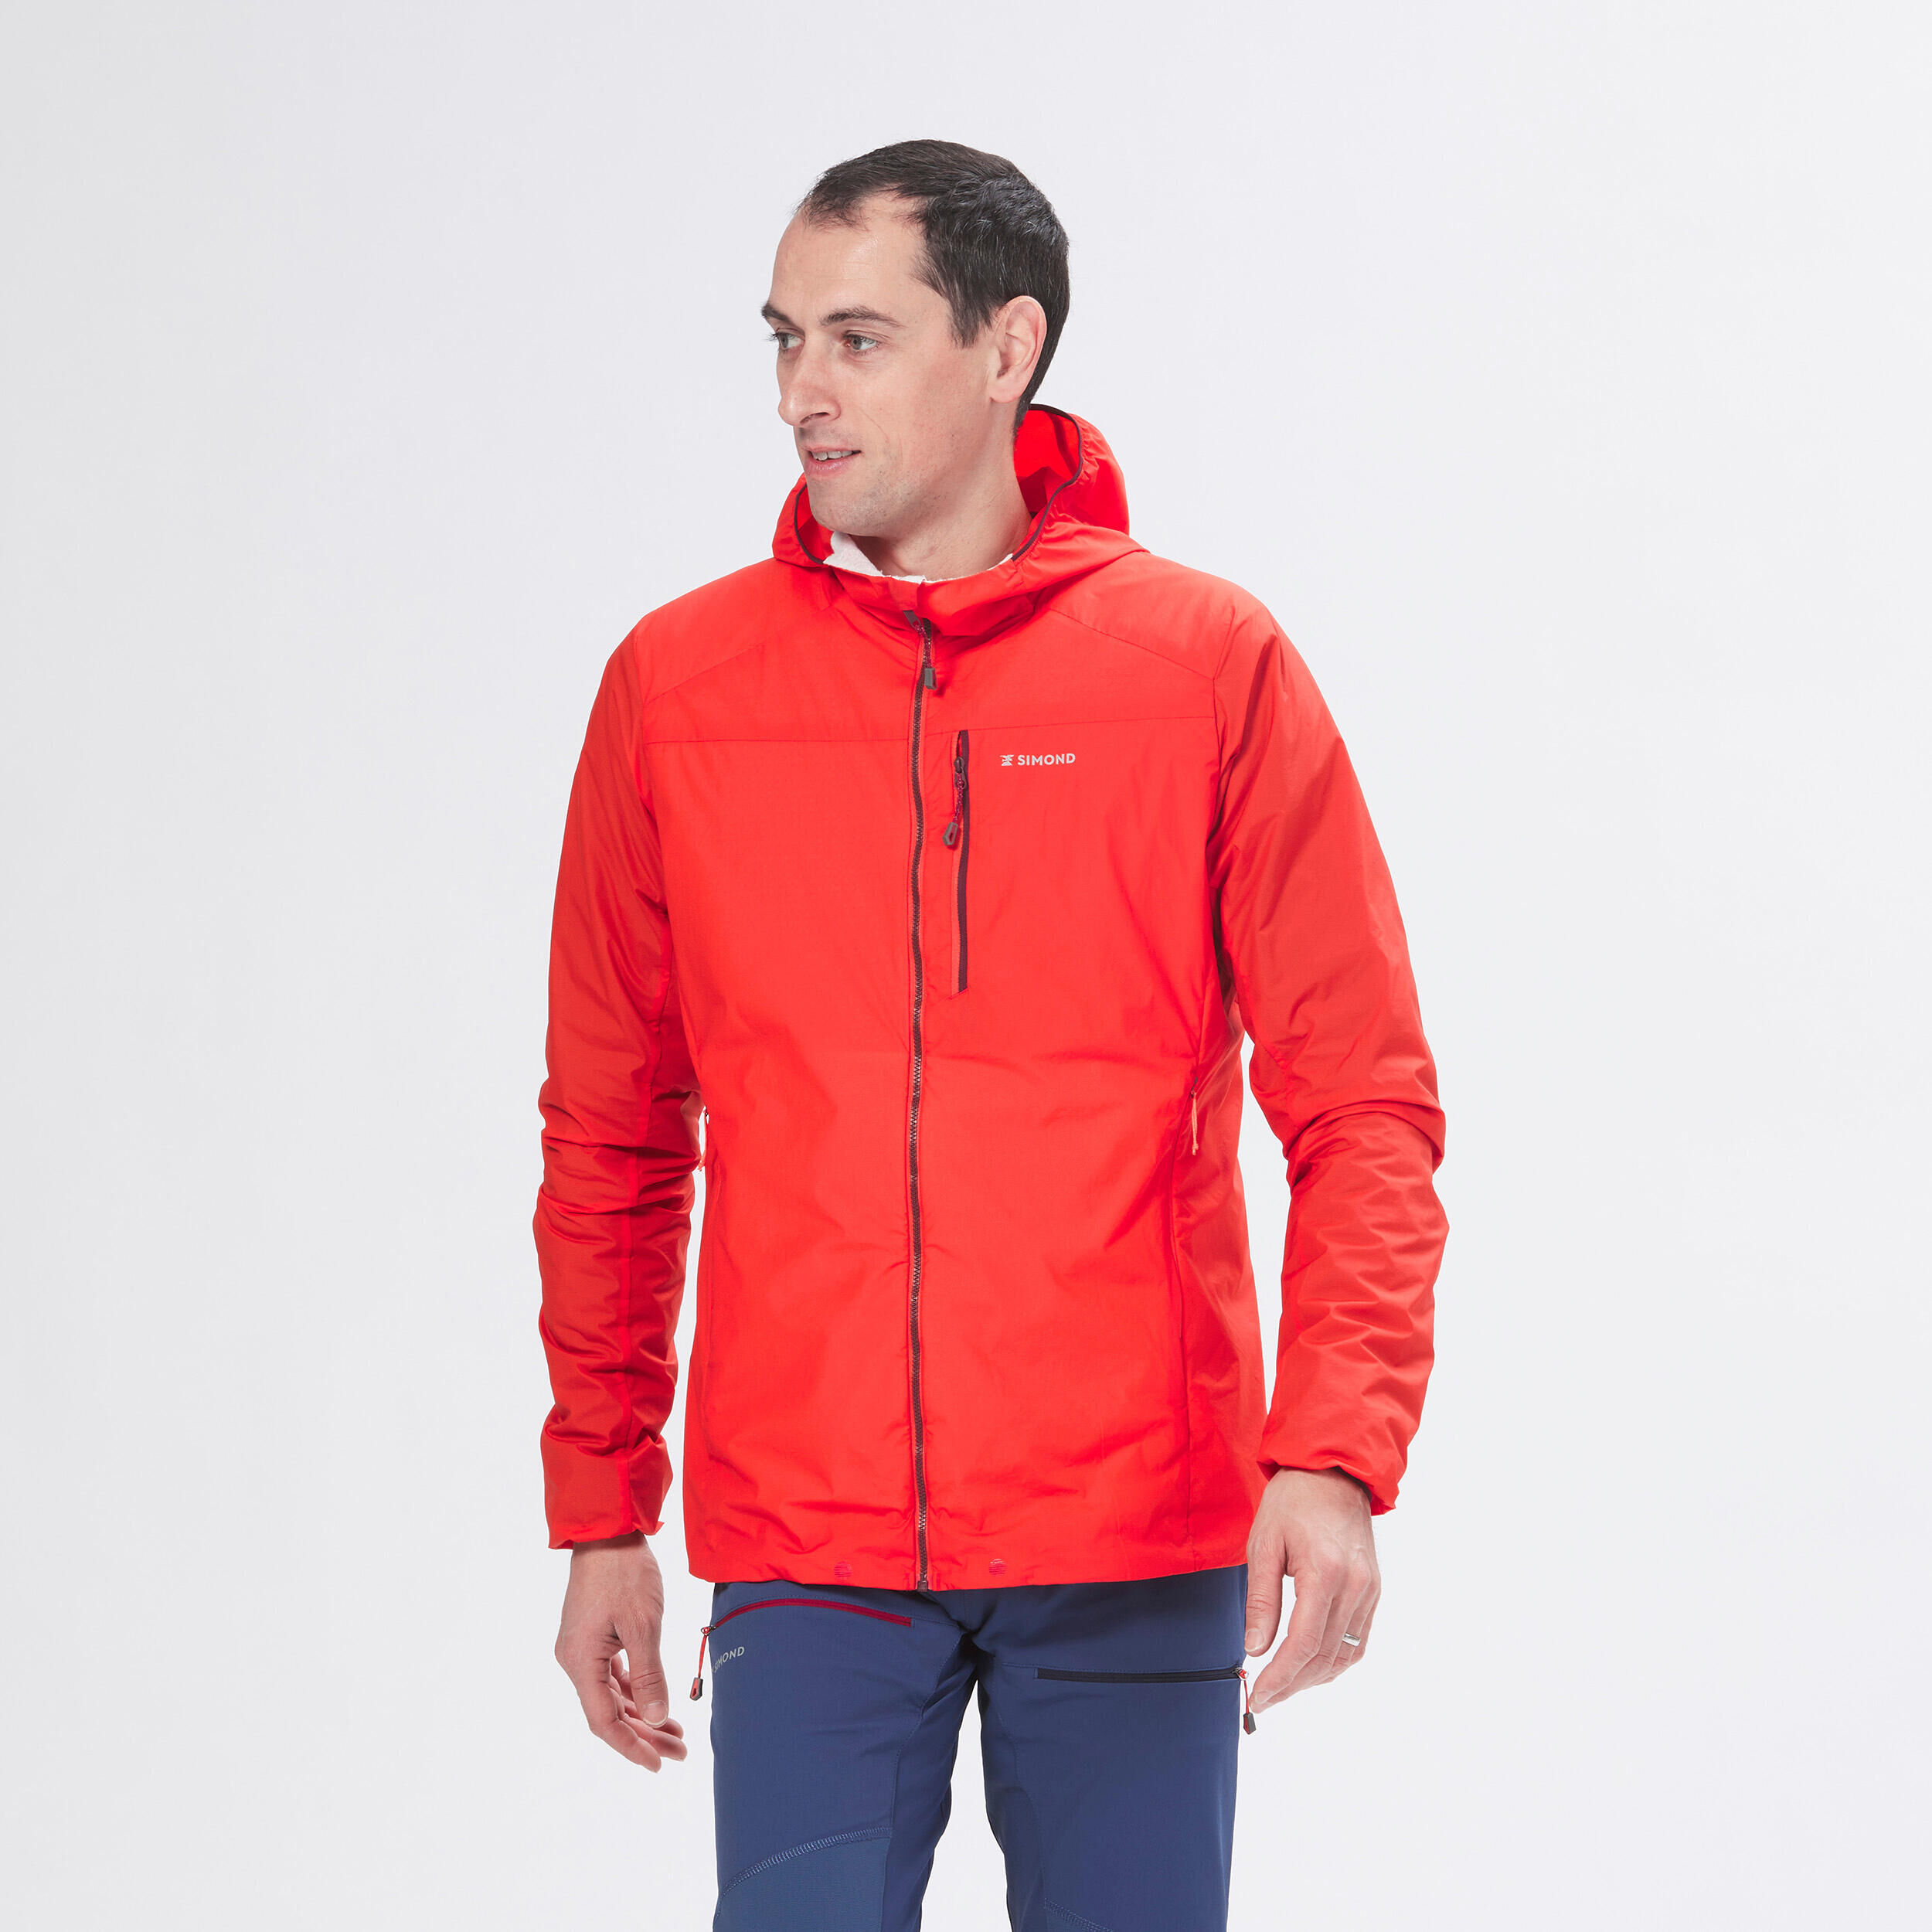 SIMOND MEN'S WINDPROOF JACKET FOR MOUNTAINEERING - VERMILION RED